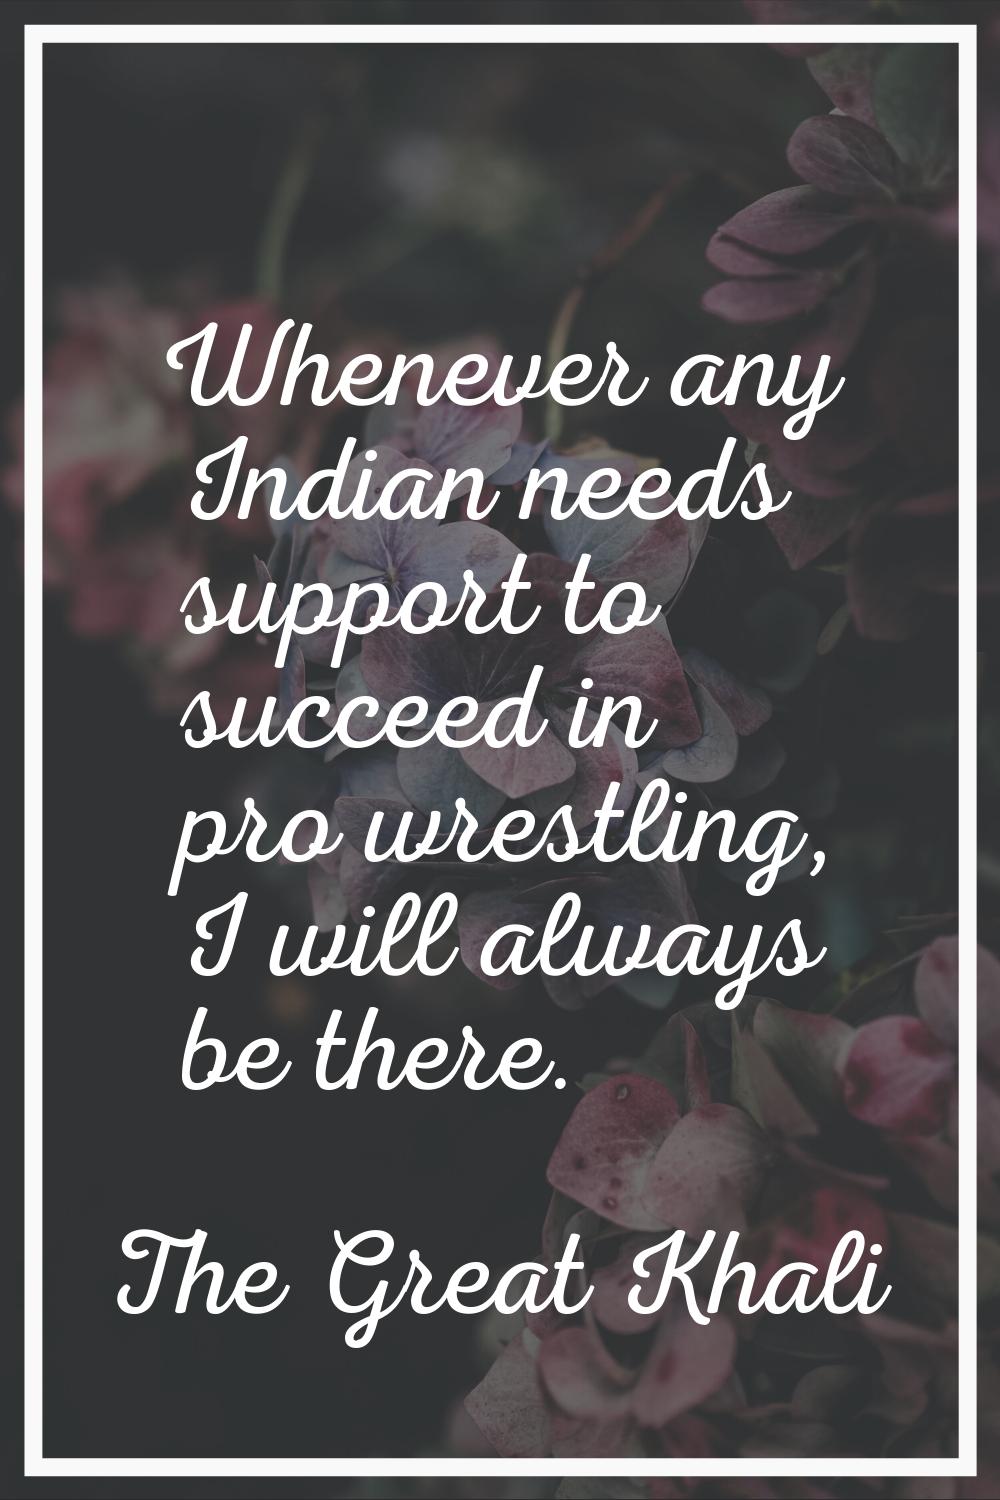 Whenever any Indian needs support to succeed in pro wrestling, I will always be there.